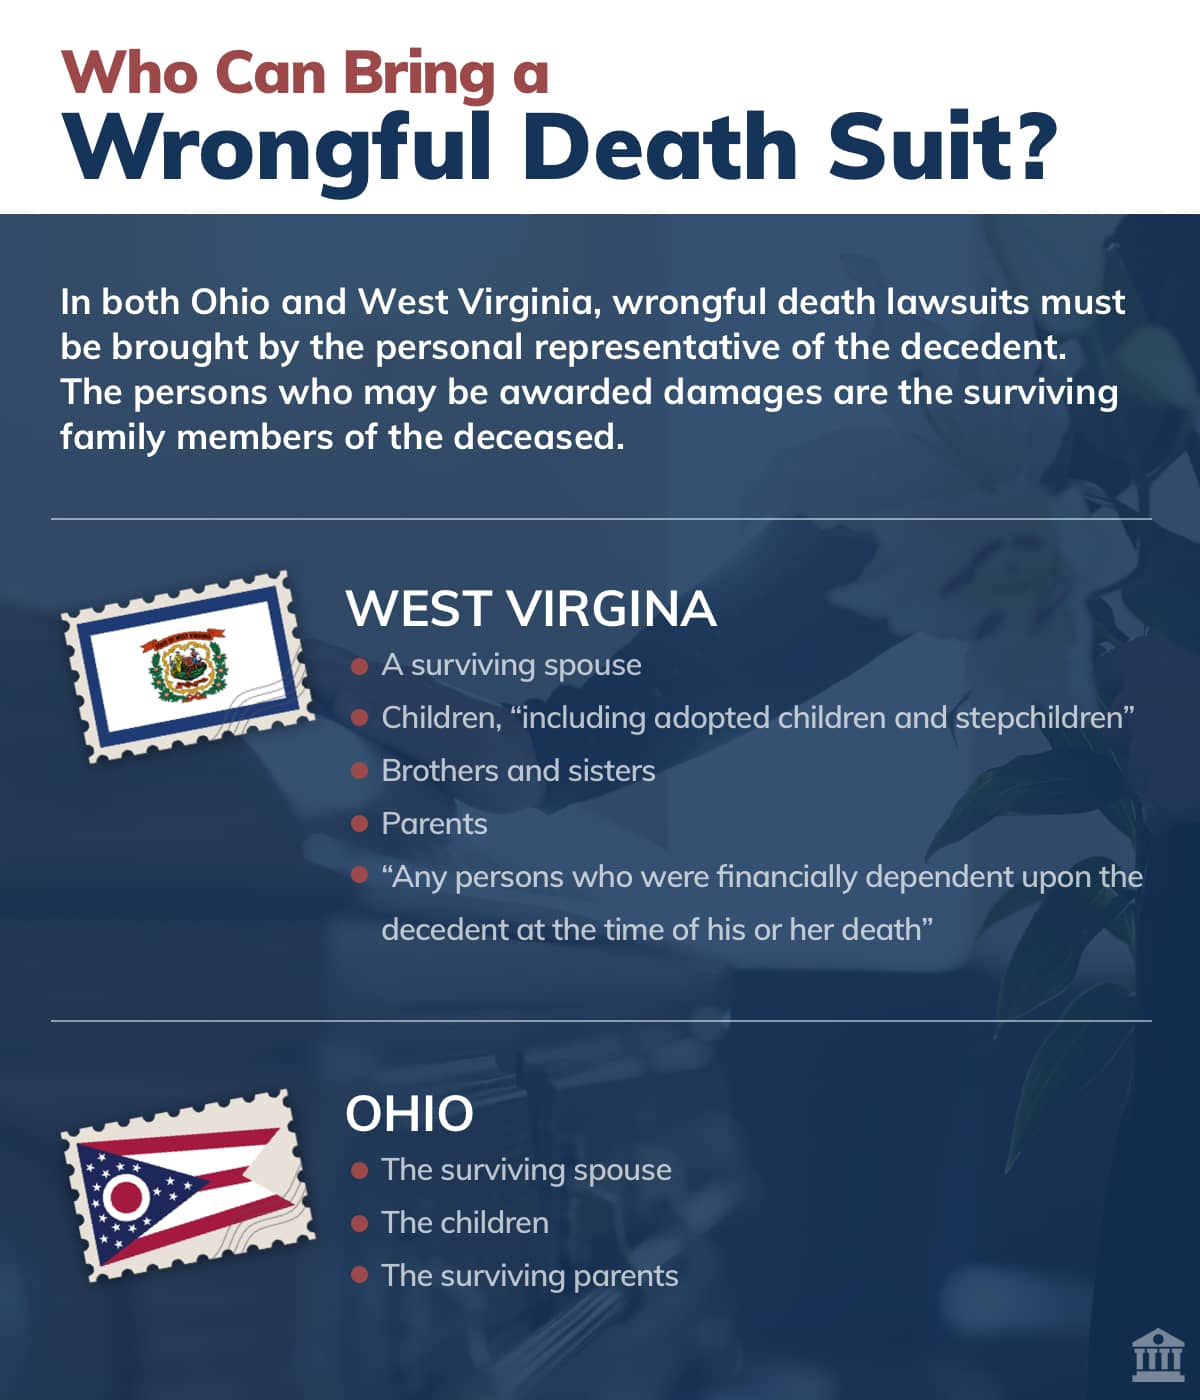 Who Can Bring a Wrongful Death Suit?